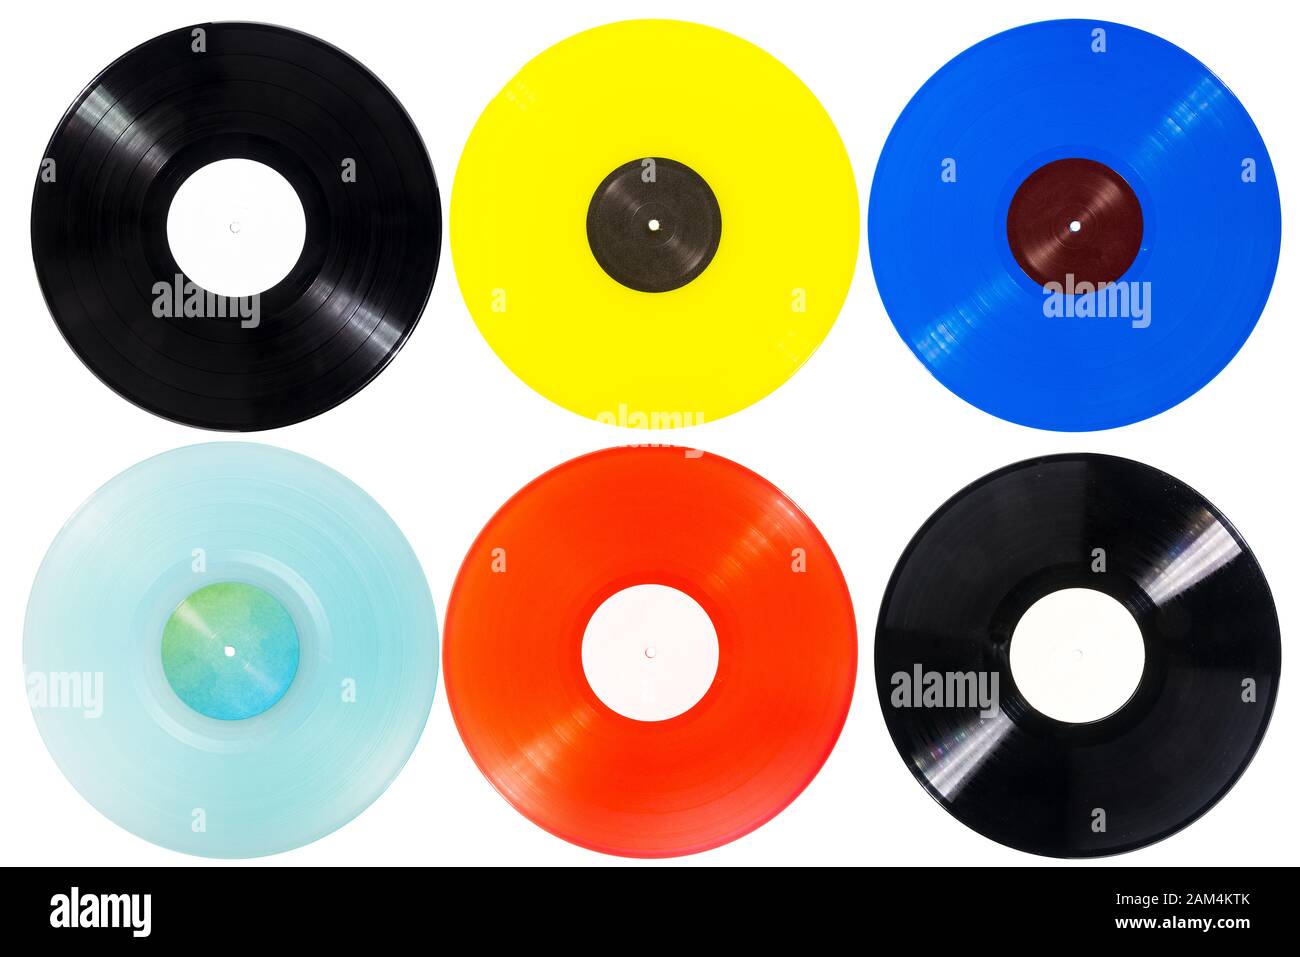 Cyan Transparent Vinyl Record Isolated On White Background Stock Photo -  Download Image Now - iStock